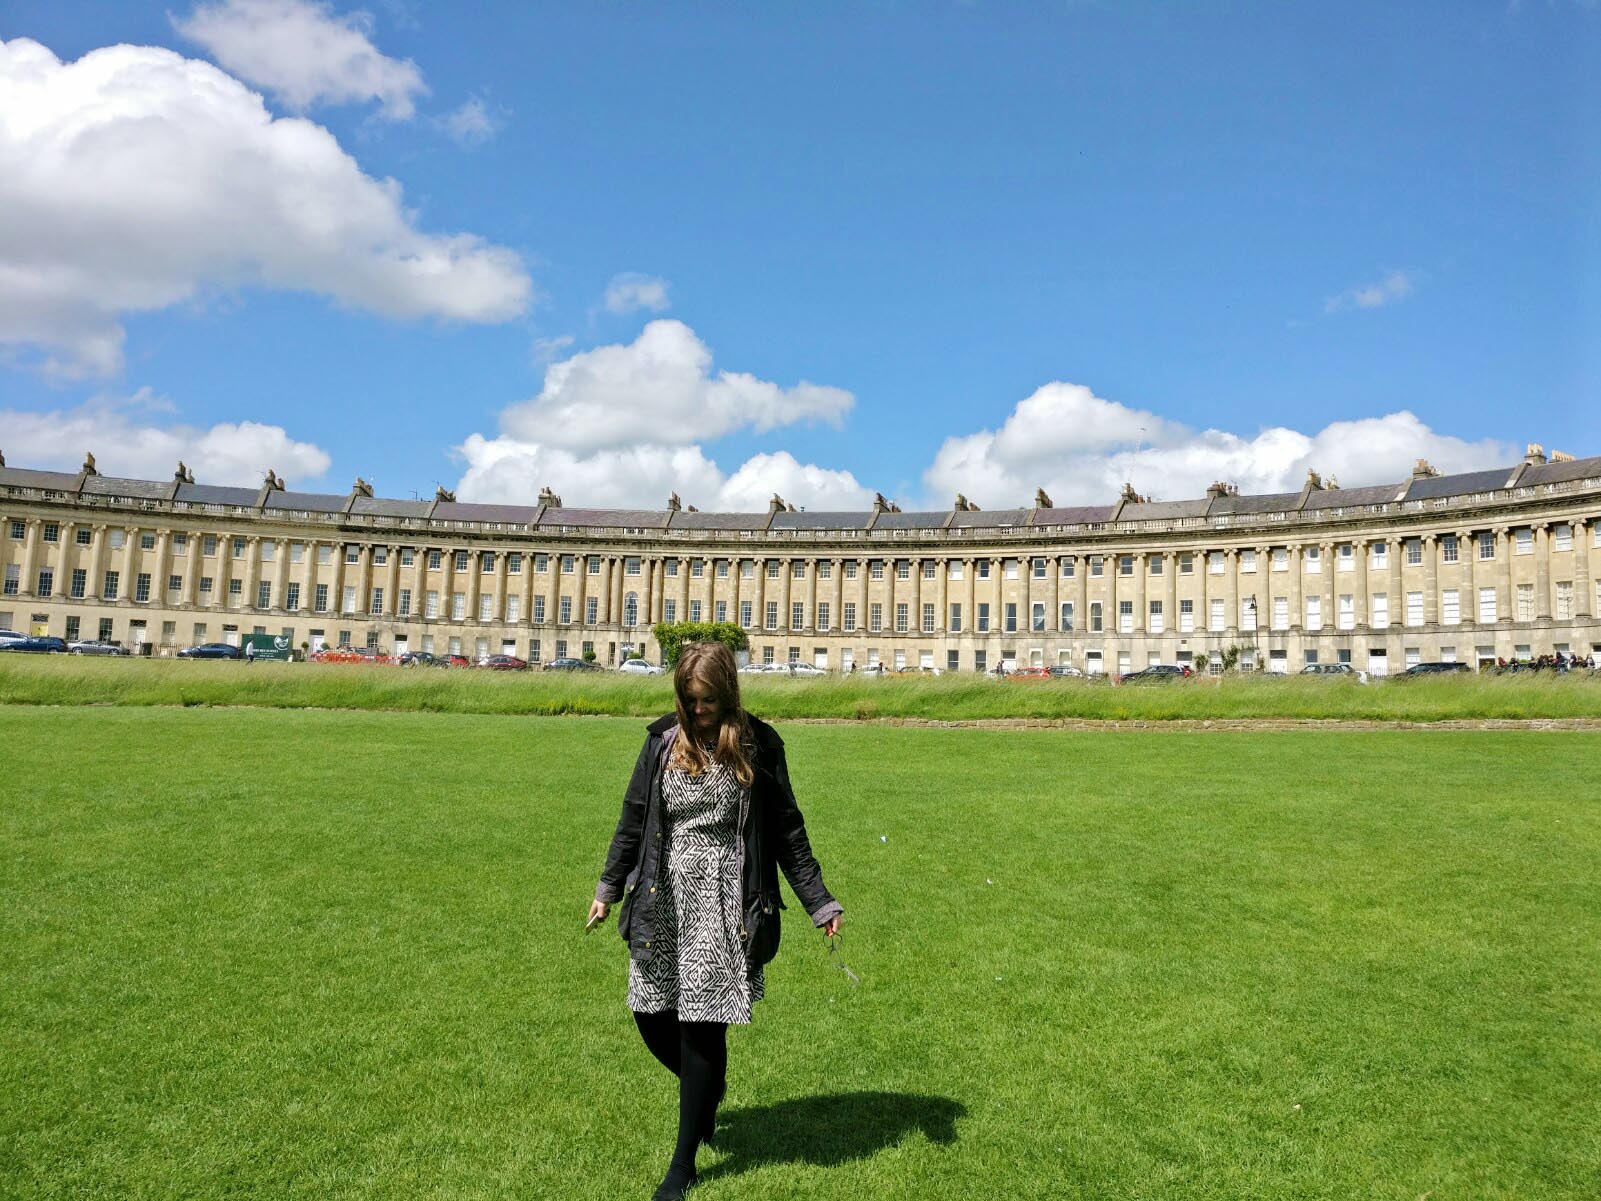 Elspeth Jackson at The Royal Crescent in Bath